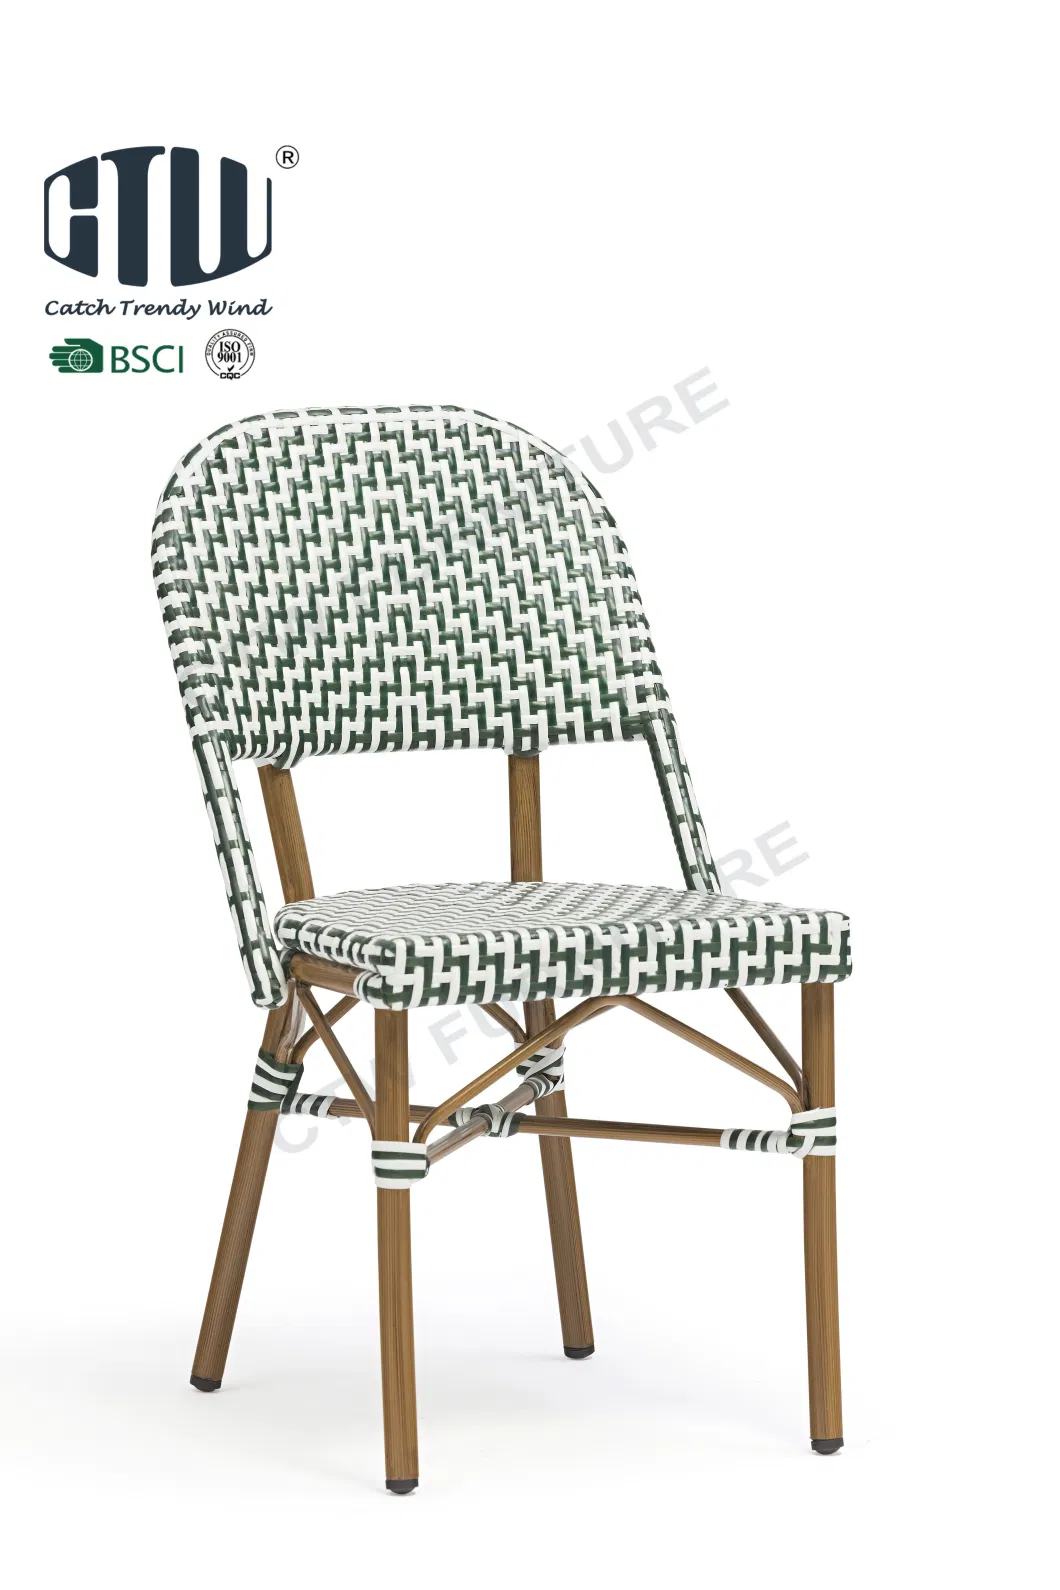 Outdoor Restaurant Stcakble Wicker Dining Chair Aluminum Arm Rattan Chair Cafe Wicker French Bistro Chairs